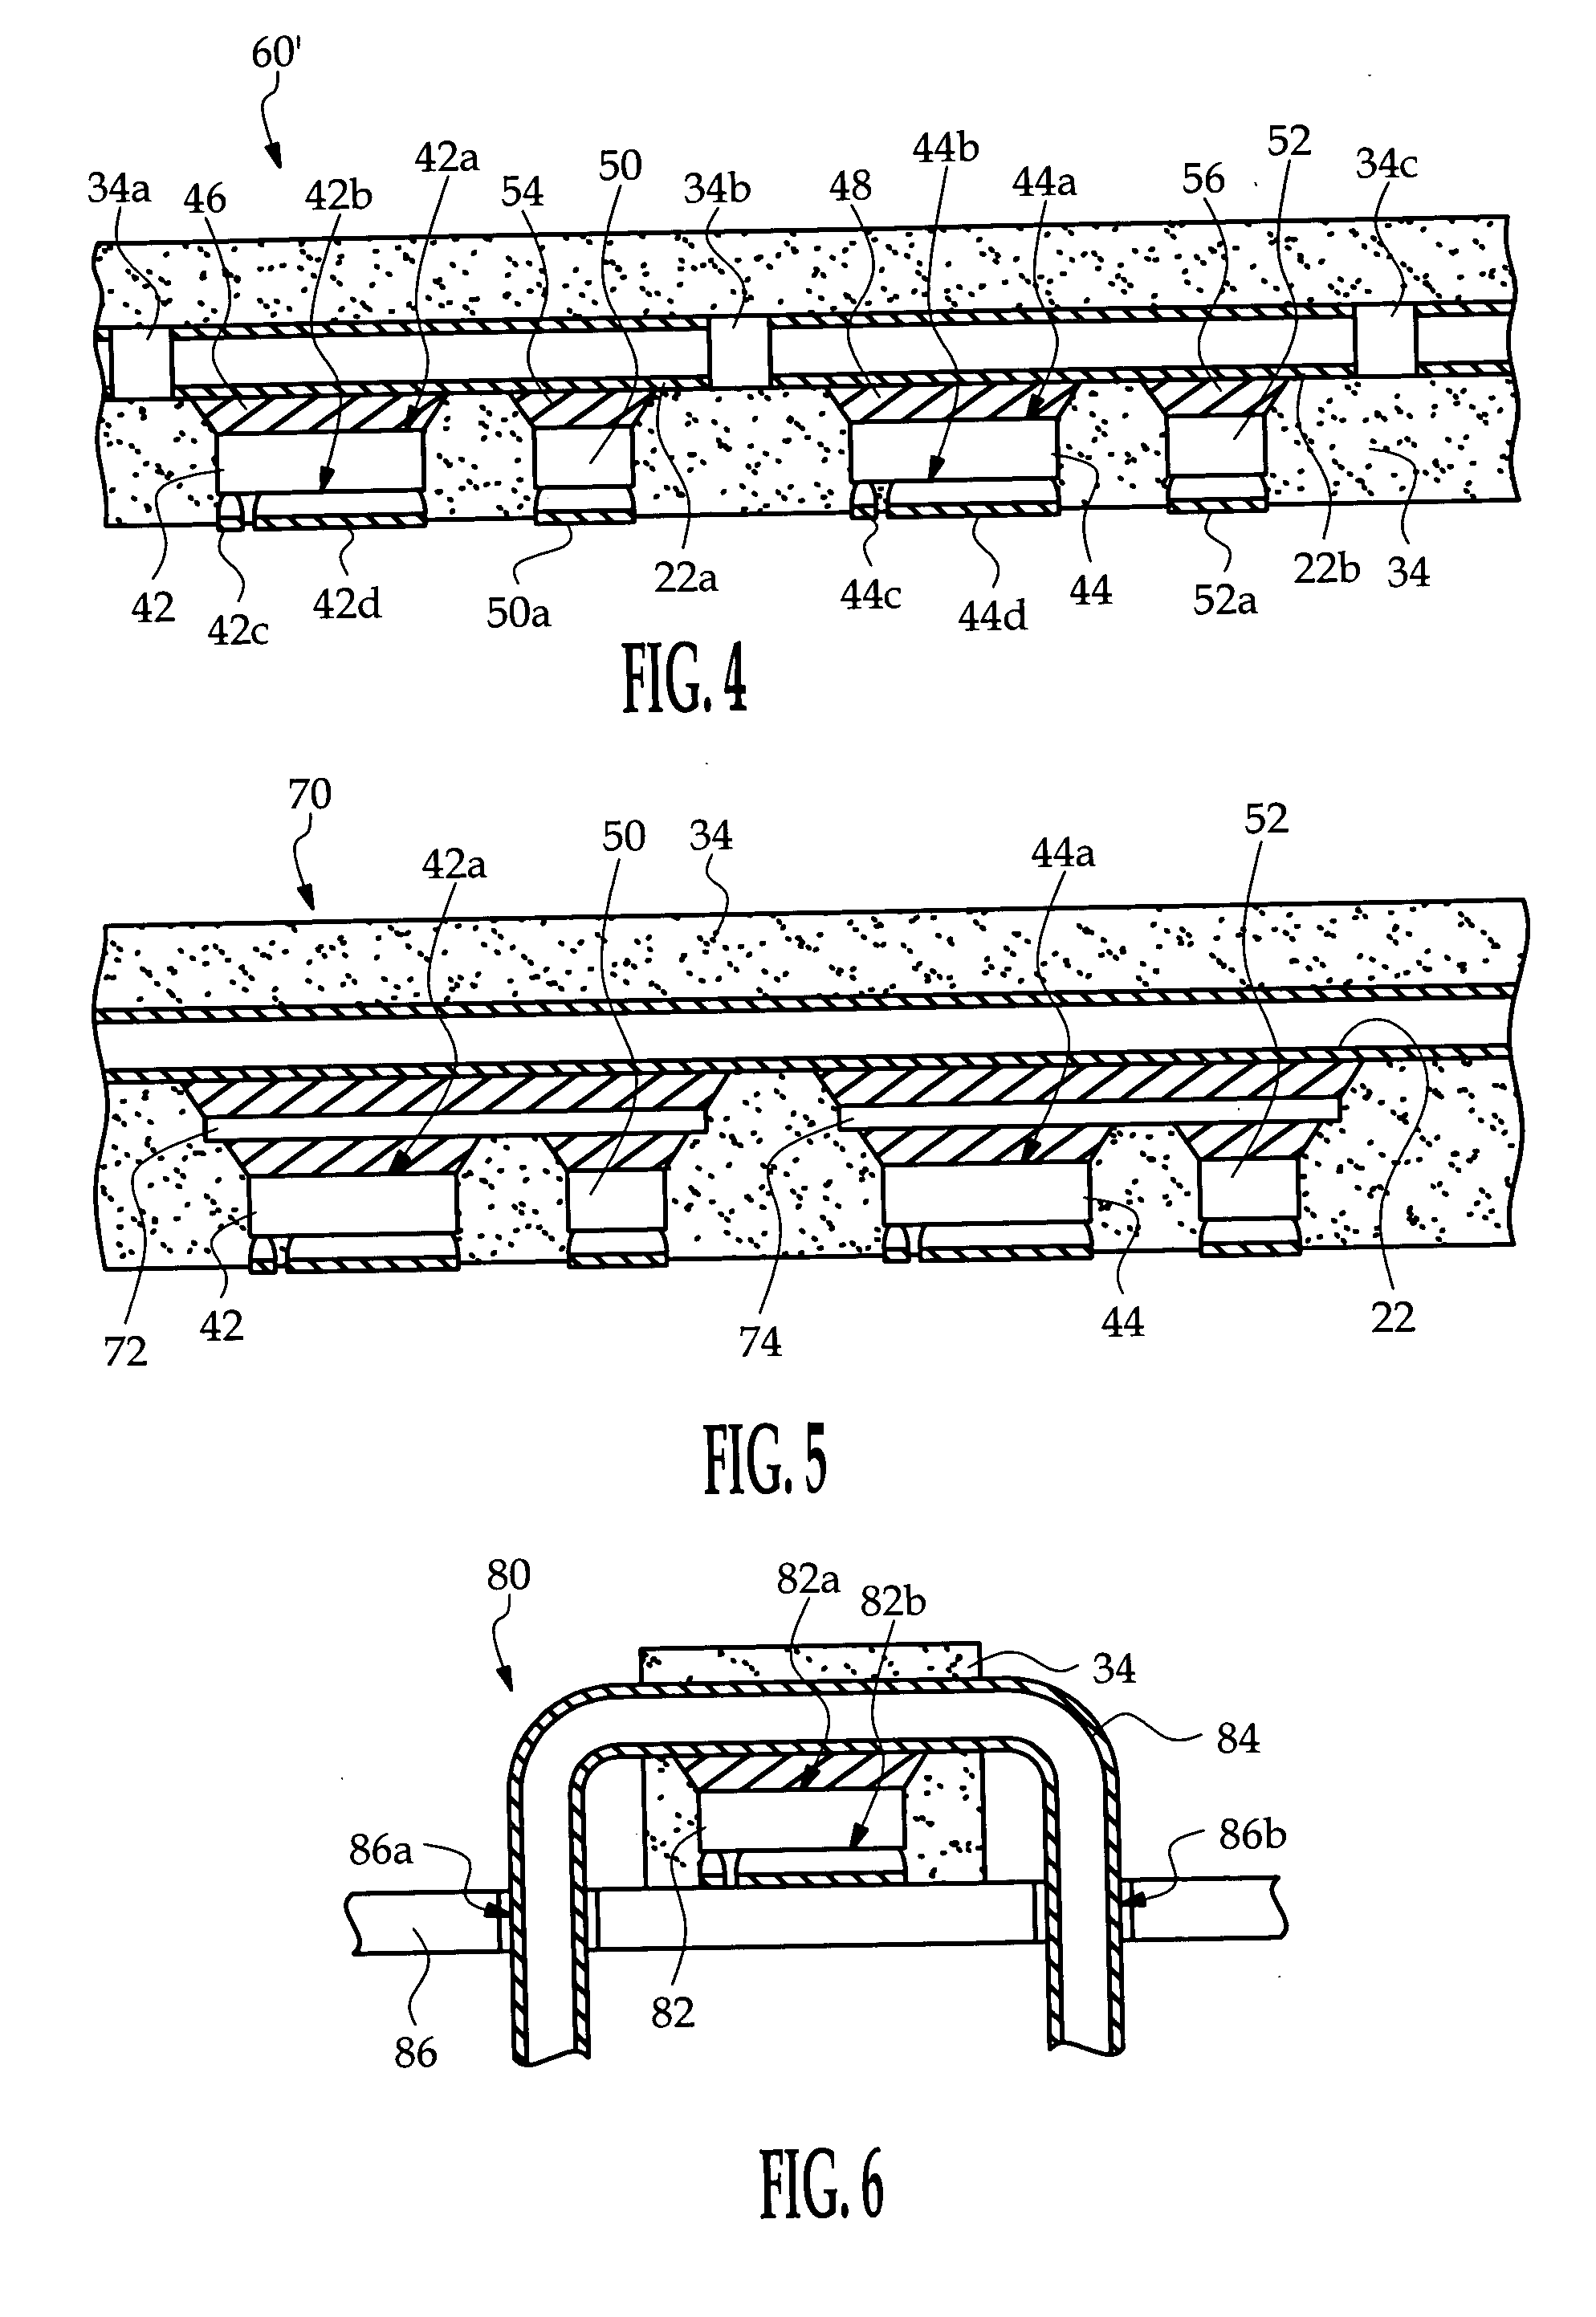 Fluid cooled encapsulated microelectronic package